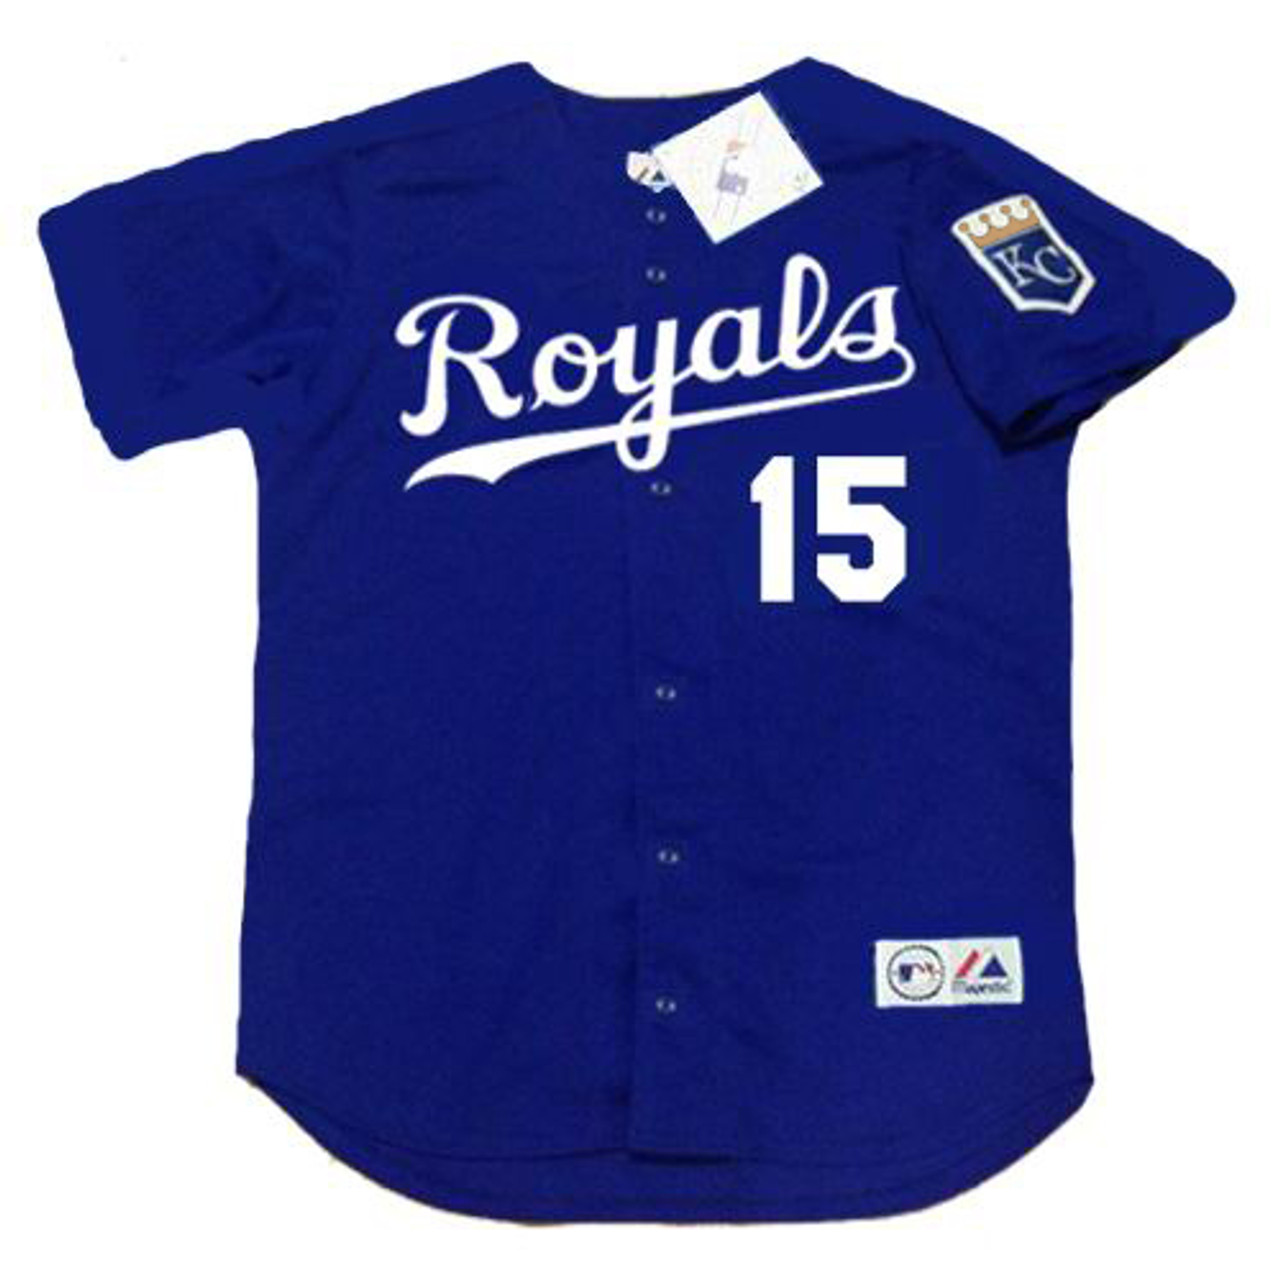 1992 KANSAS CITY ROYALS AUTHENTIC RUSSELL ATHLETIC JERSEY (HOME) S